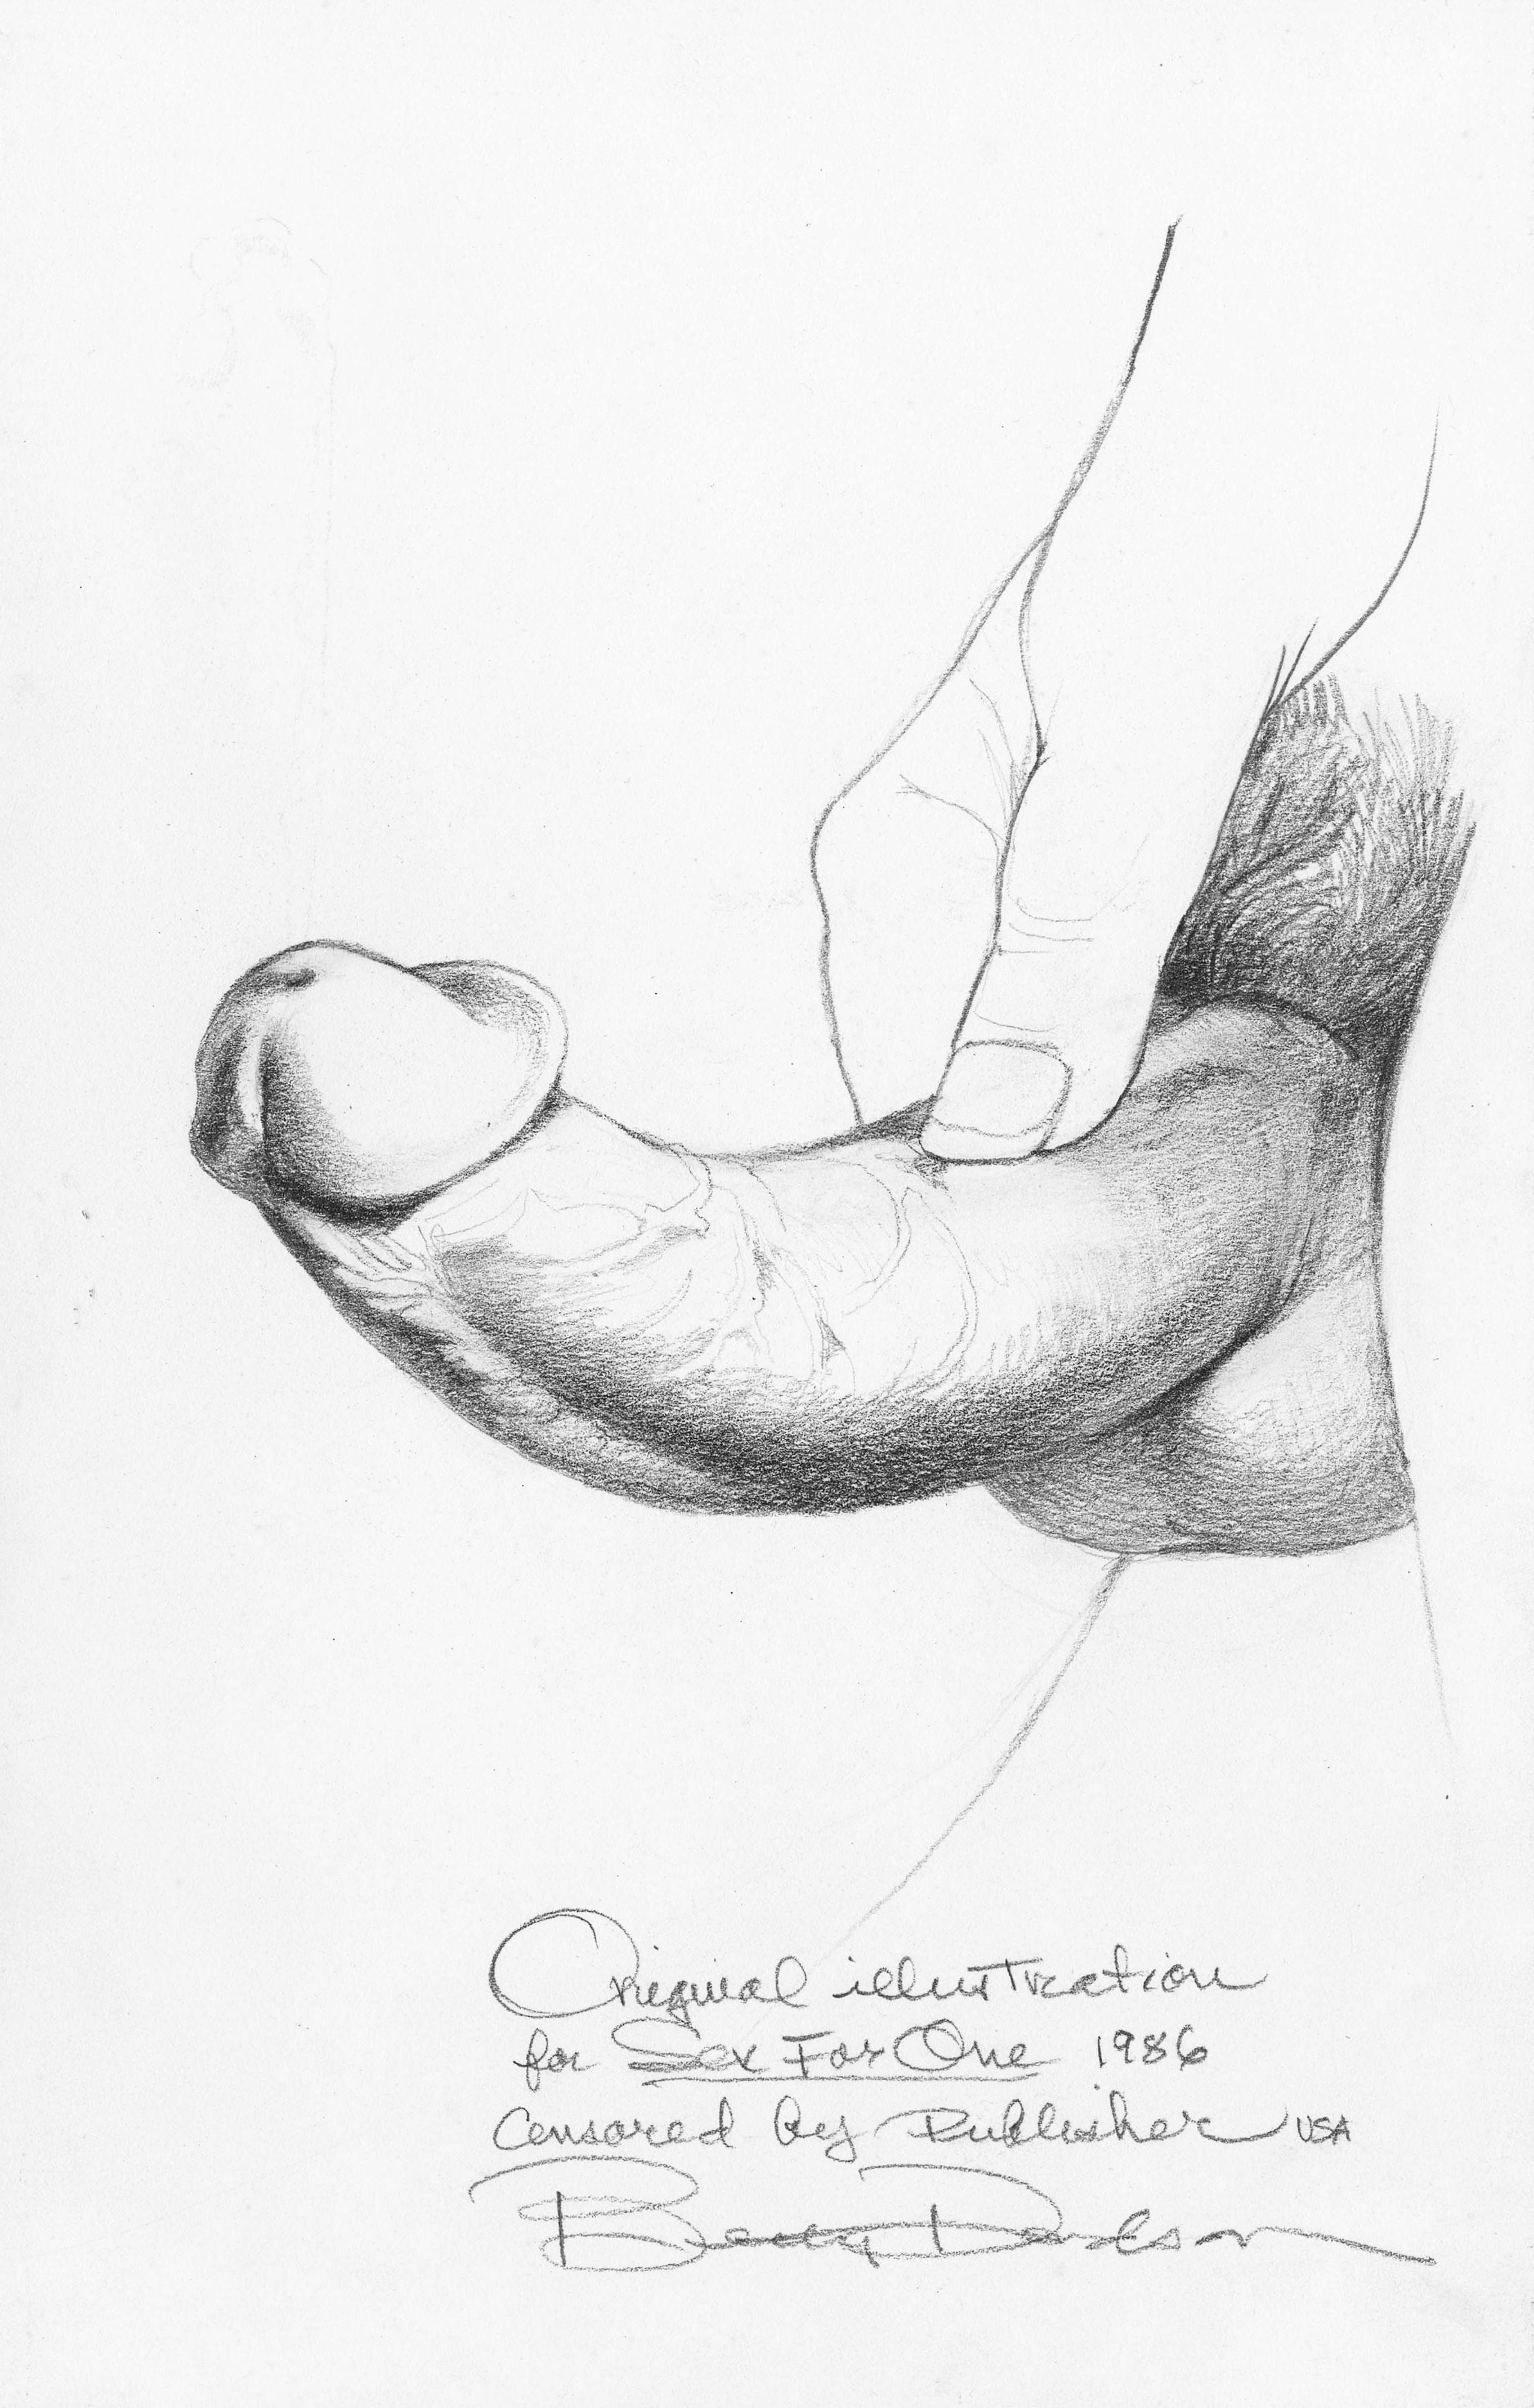 Add penis size to the list of qualifications drawing by david sipress.